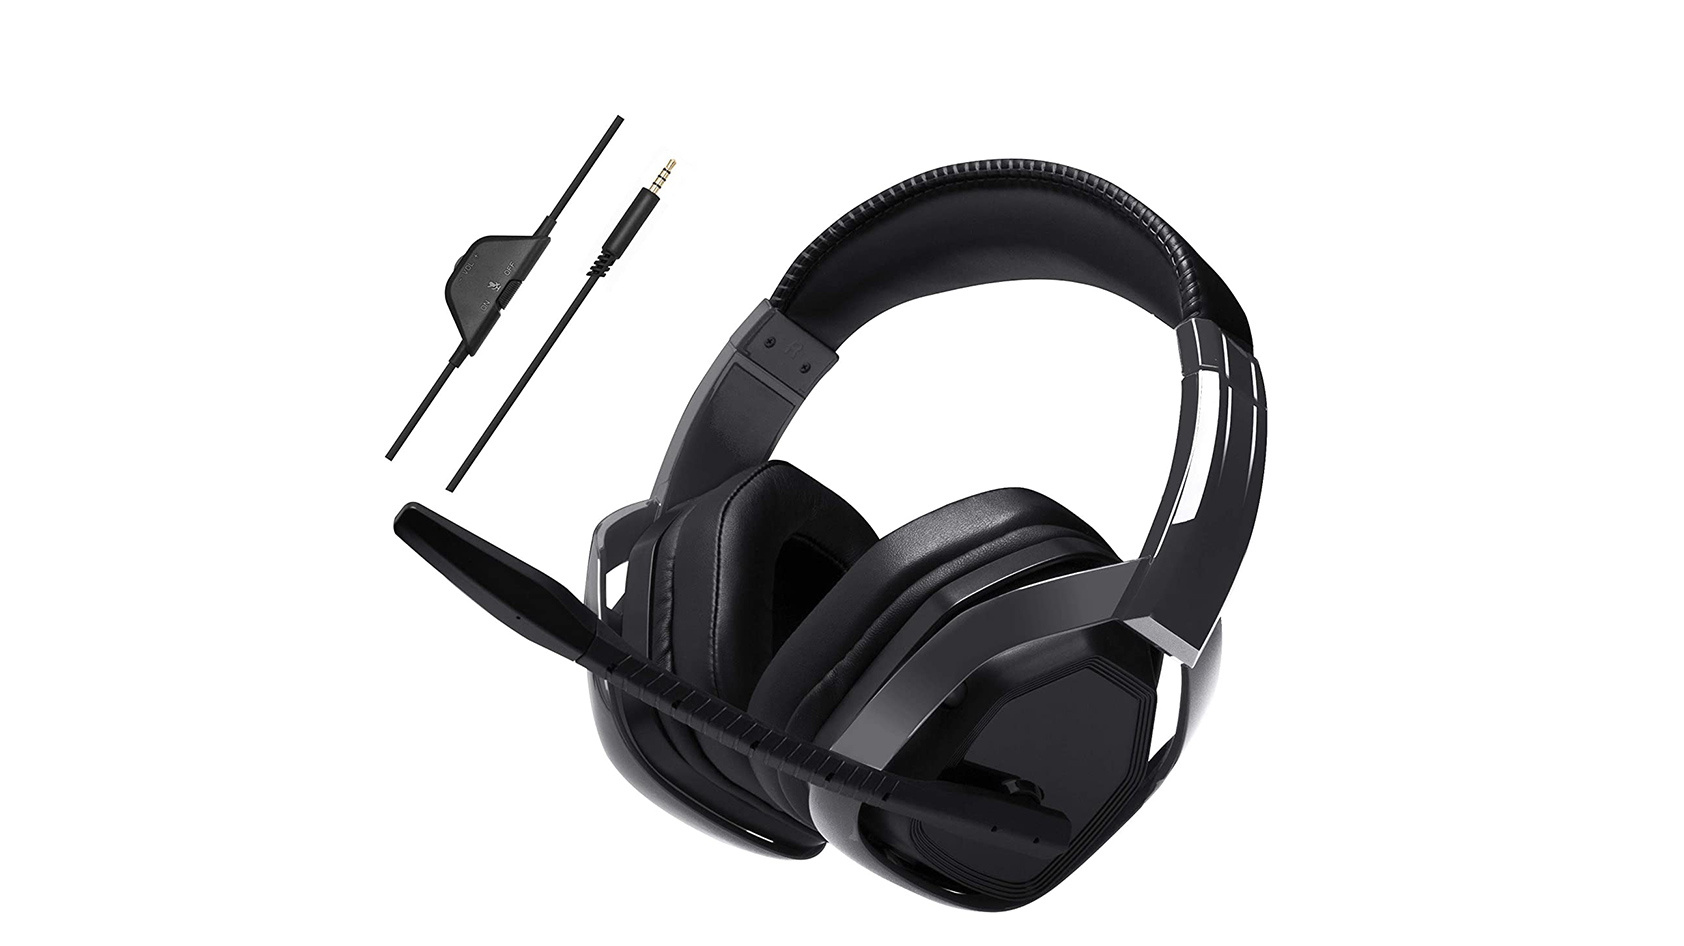 The AmazonBasics Pro Gaming Headset in black against a white background.